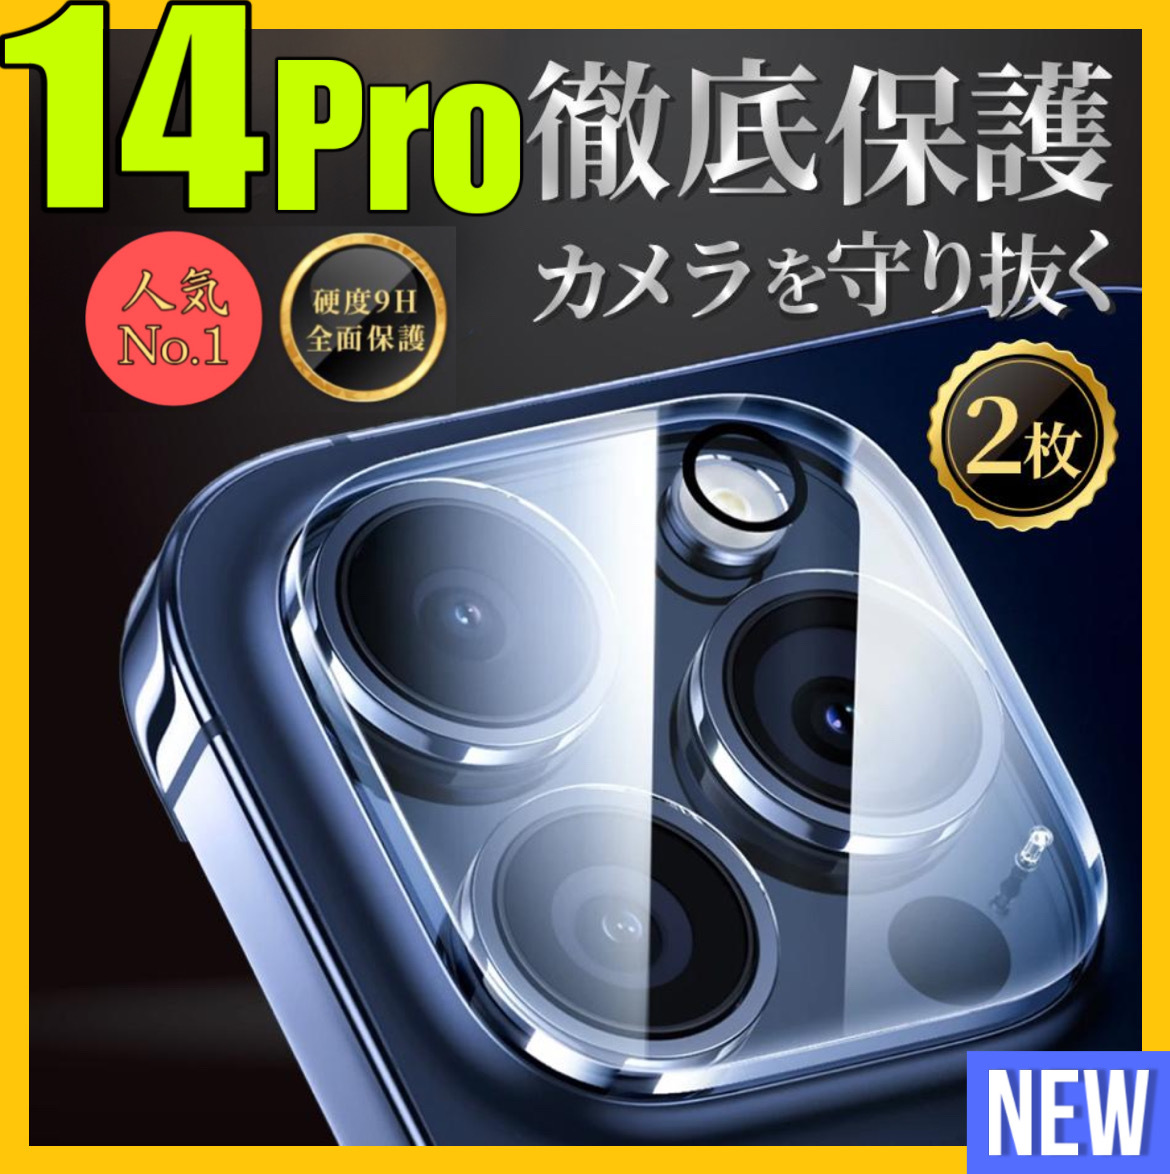 2 sheets entering Iphone14Pro camera cover lens cover the glass film protection film I ho n14 Pro camera film camera protection 